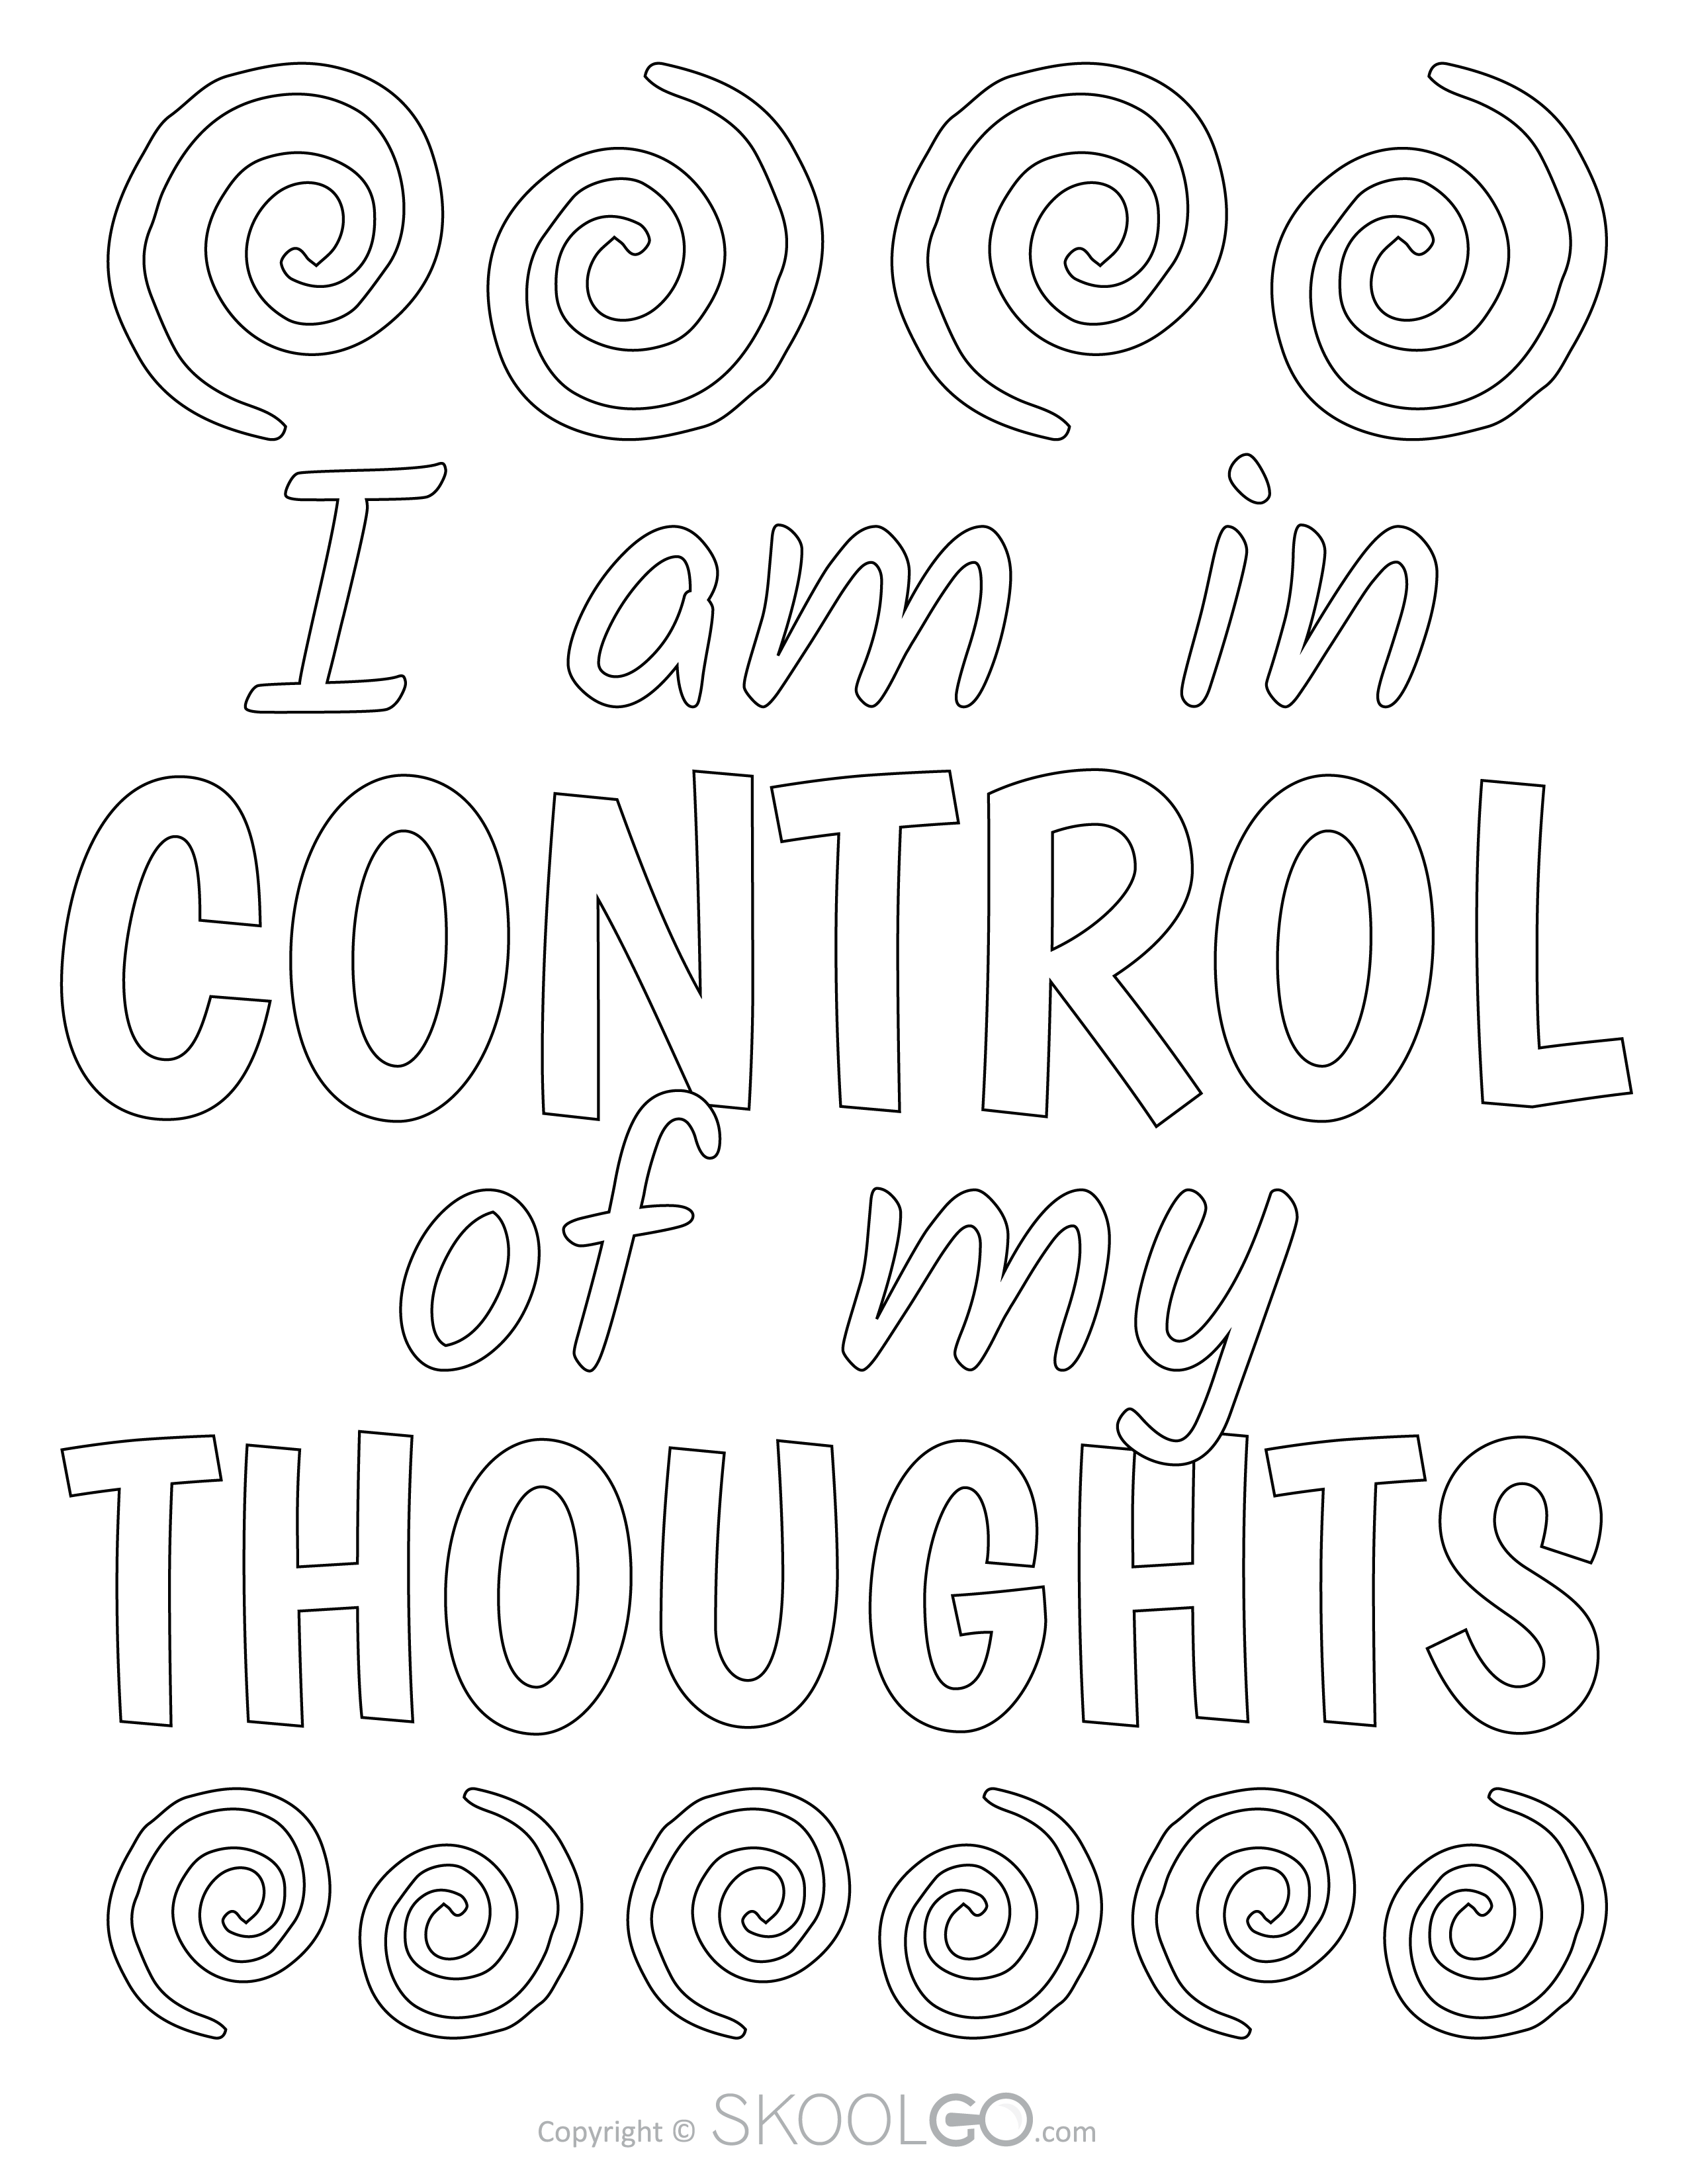 I Am In Control Of My Thoughts - Free Classroom Poster Coloring Version